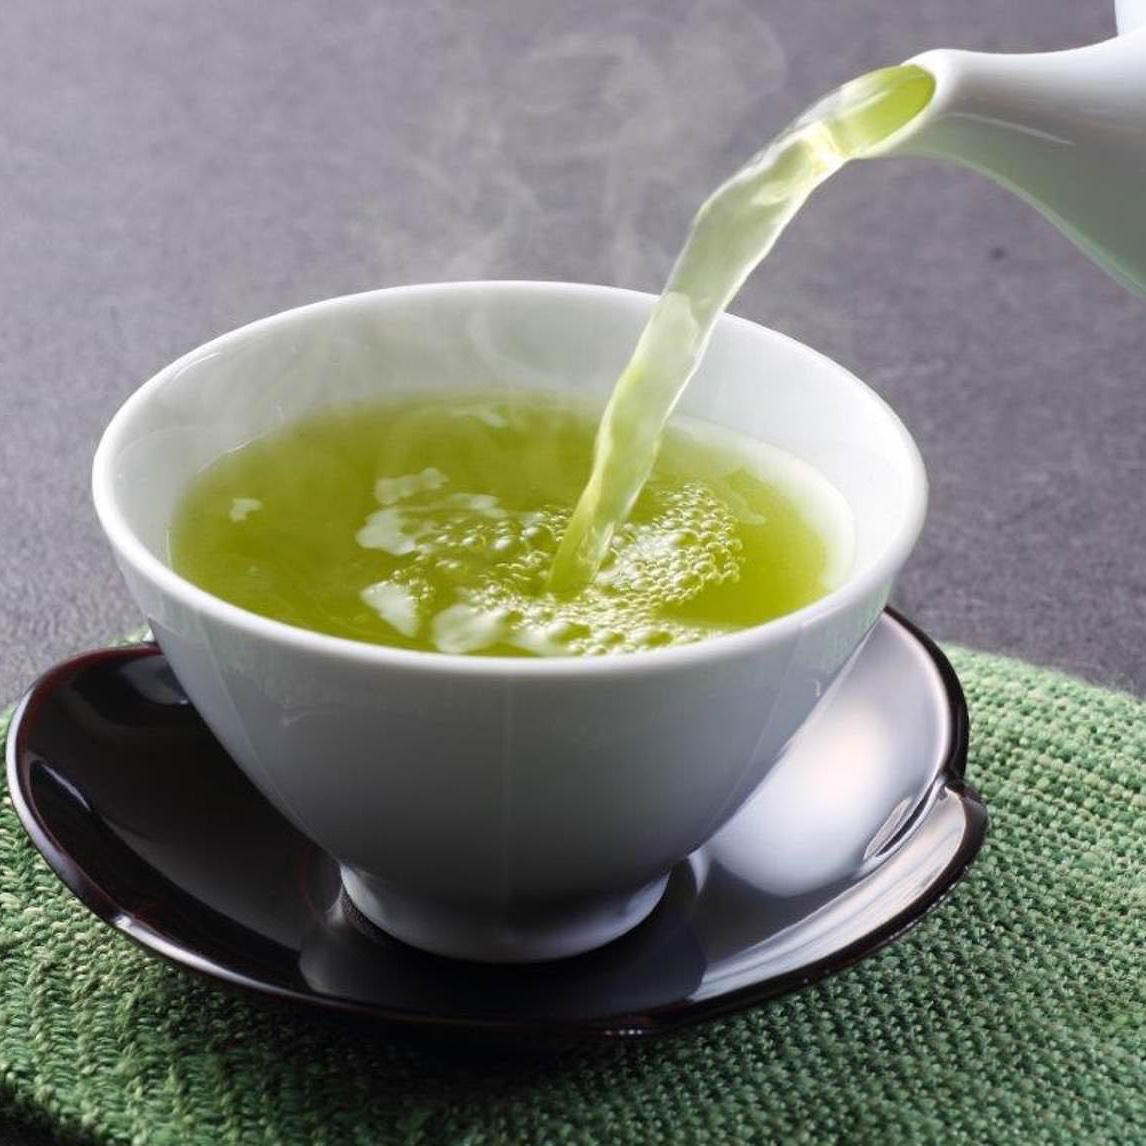 SERIES 11 (2018) / GREEN TEA There are strong and valid arguments to be made for it’s detoxing qualities.  It is good for you, cleans up your insides and offers renewal But you can’t avoid the fact that it is basically just cloudy water, especially next to.....